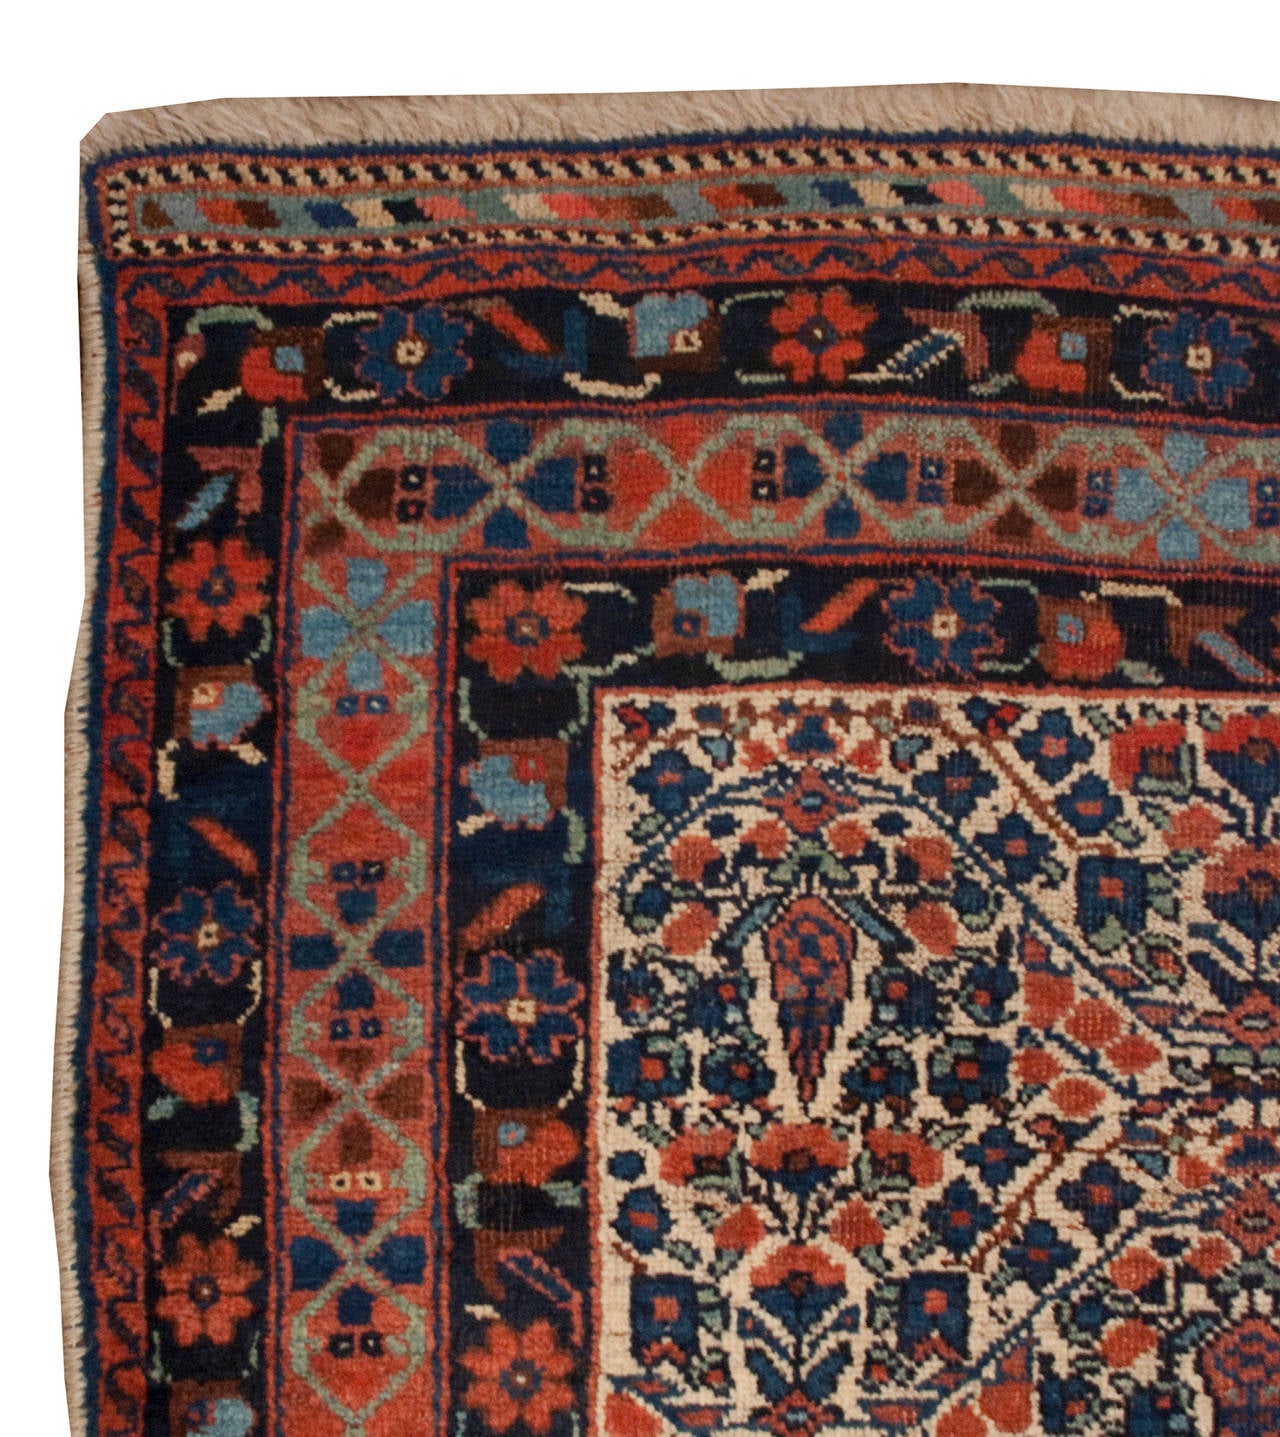 A late 19th century Persian Afshar rug with a beautifully woven multicolored central field with a tree-of-life pattern surrounded by multiple contrasting floral borders.